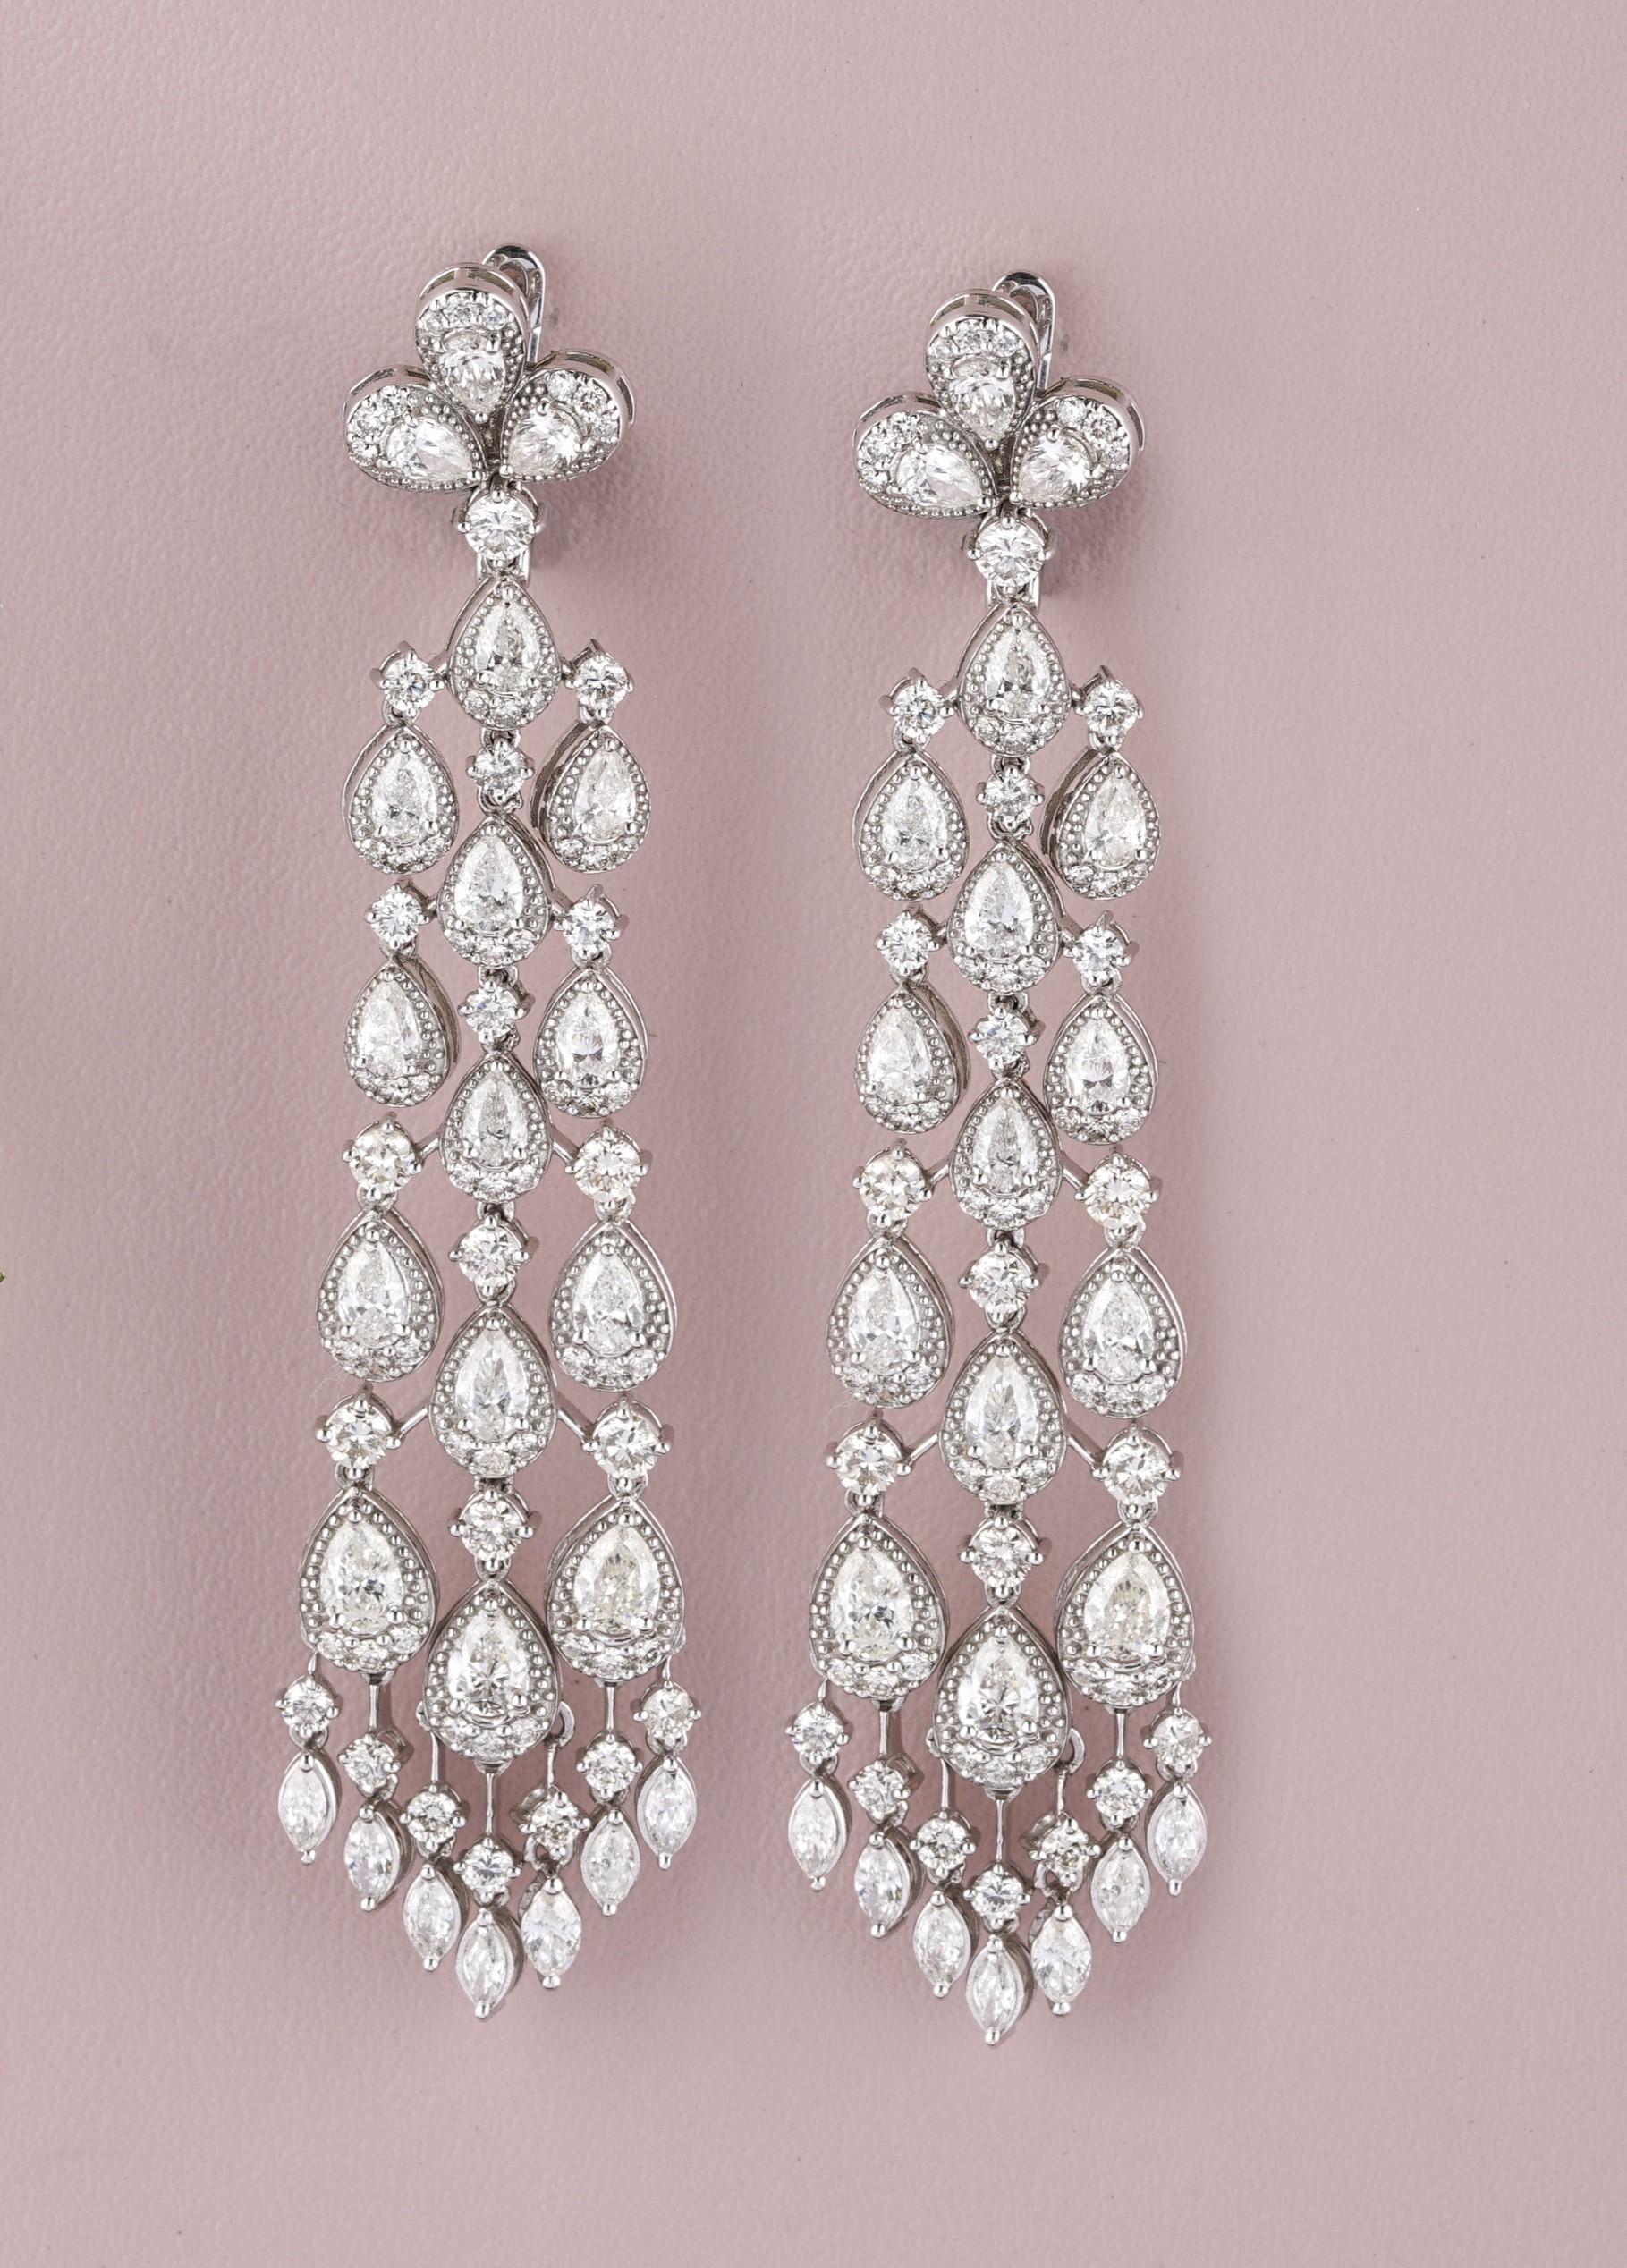 Adorn yourself with these magnificent 18k solid gold chandelier earrings. These earrings are meticulously crafted with a stunning arrangement of pear and marquise-shaped diamonds, cascading elegantly to create a dazzling effect. Each earring